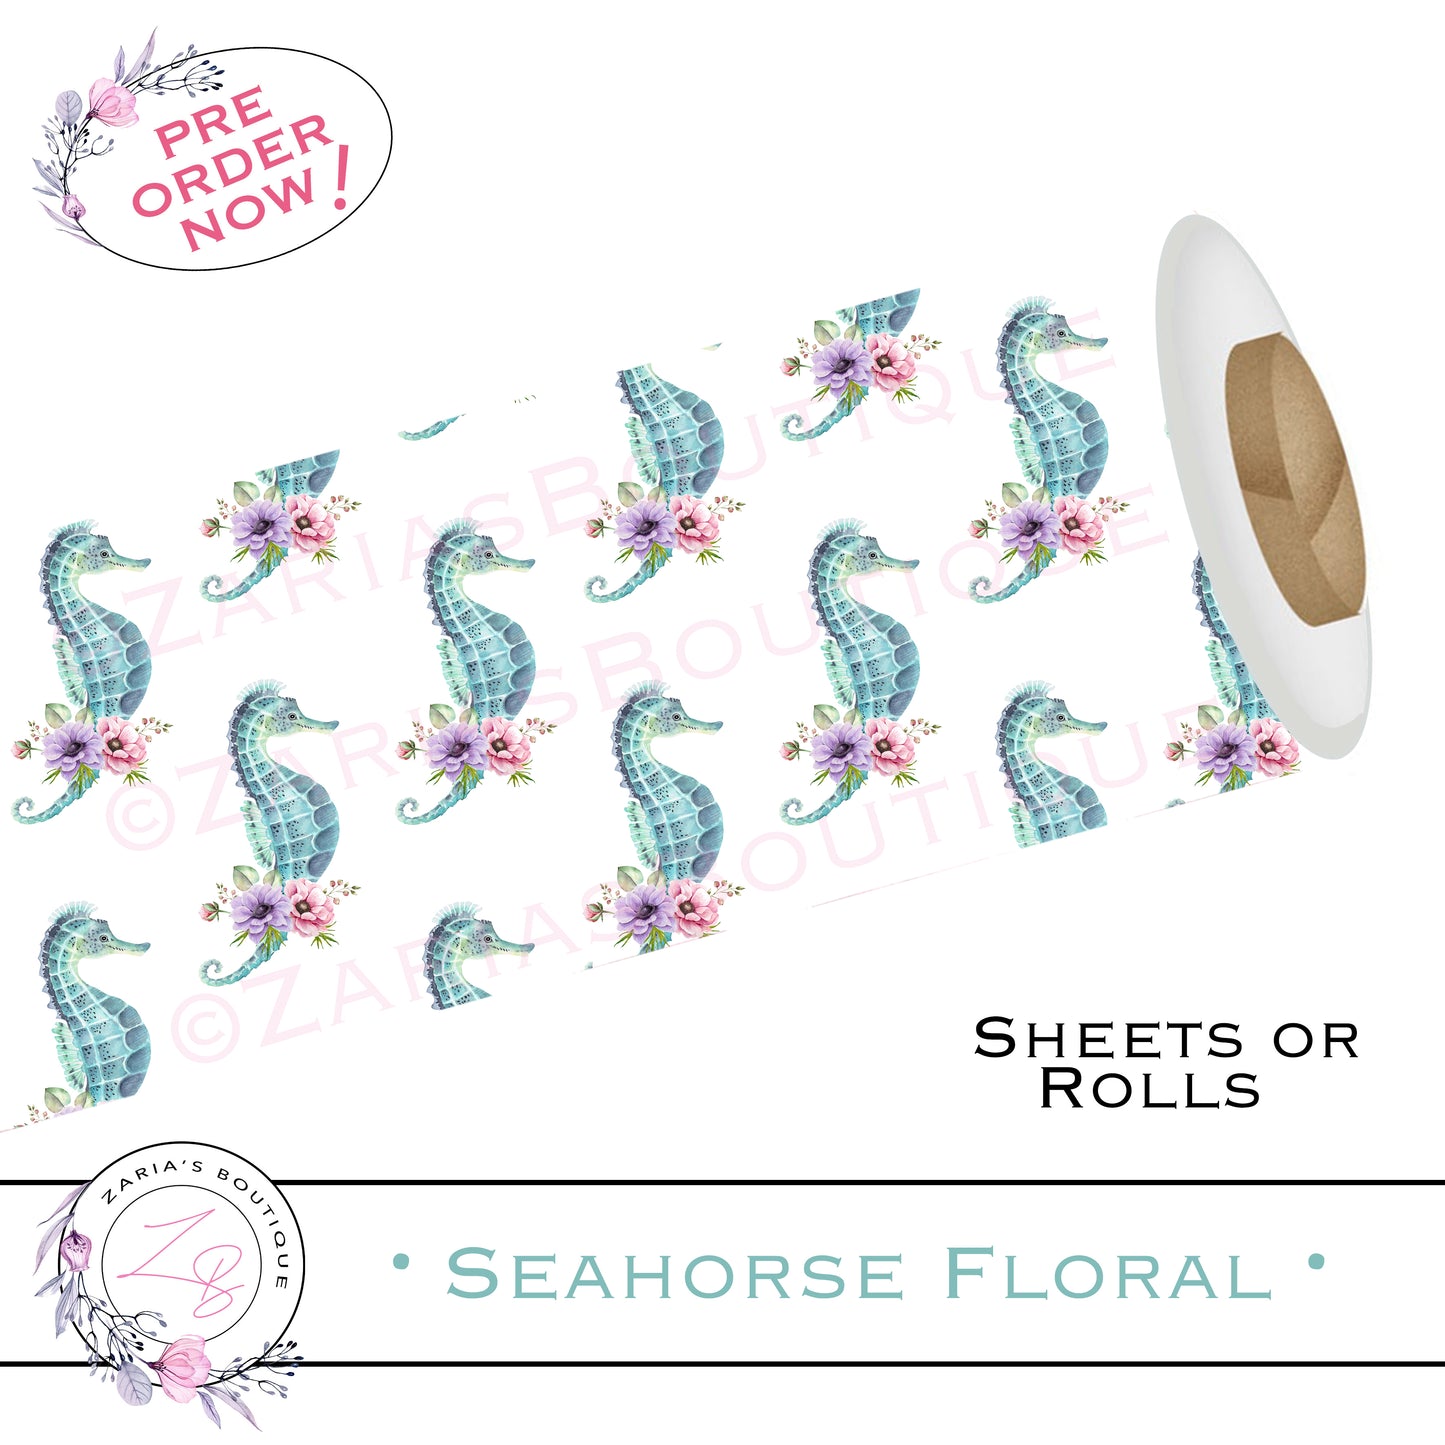 ⋅ Seahorse Floral ⋅ Custom Vegan Faux Leather ⋅ Sheets Or Rolls!